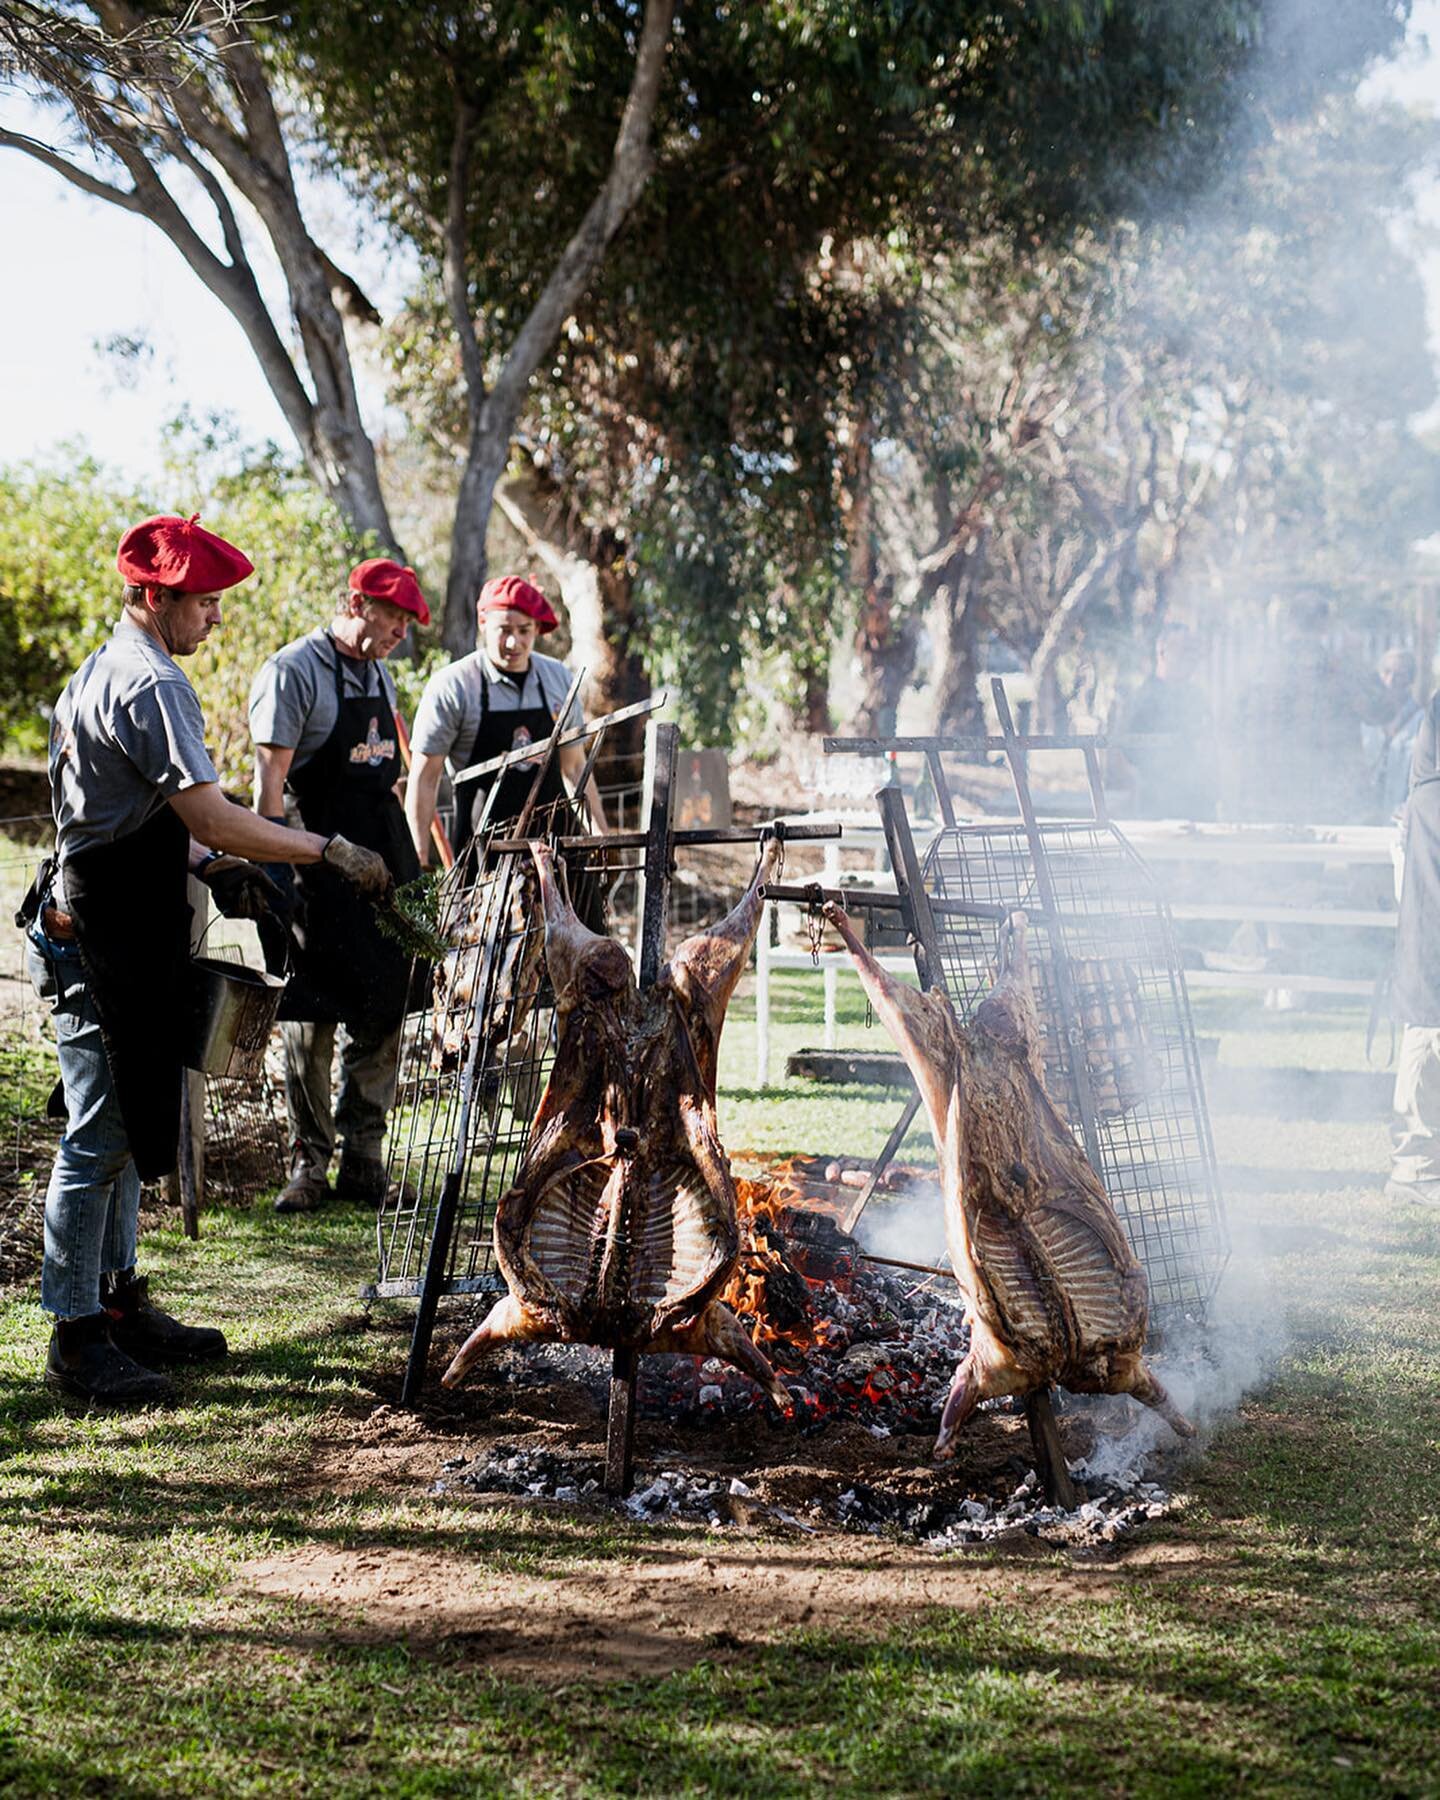 Throwback to an epic day with an epic crew! Thank you @charlotte_dalton_wines and @cooke_brothers_wines for having us 🔥🍷🔥

📸: @_represented_ @evan_bailey_photography

#asado #argentinianbbq #lamb #chorizo #beef #choripan #alfajores #portelliot #c